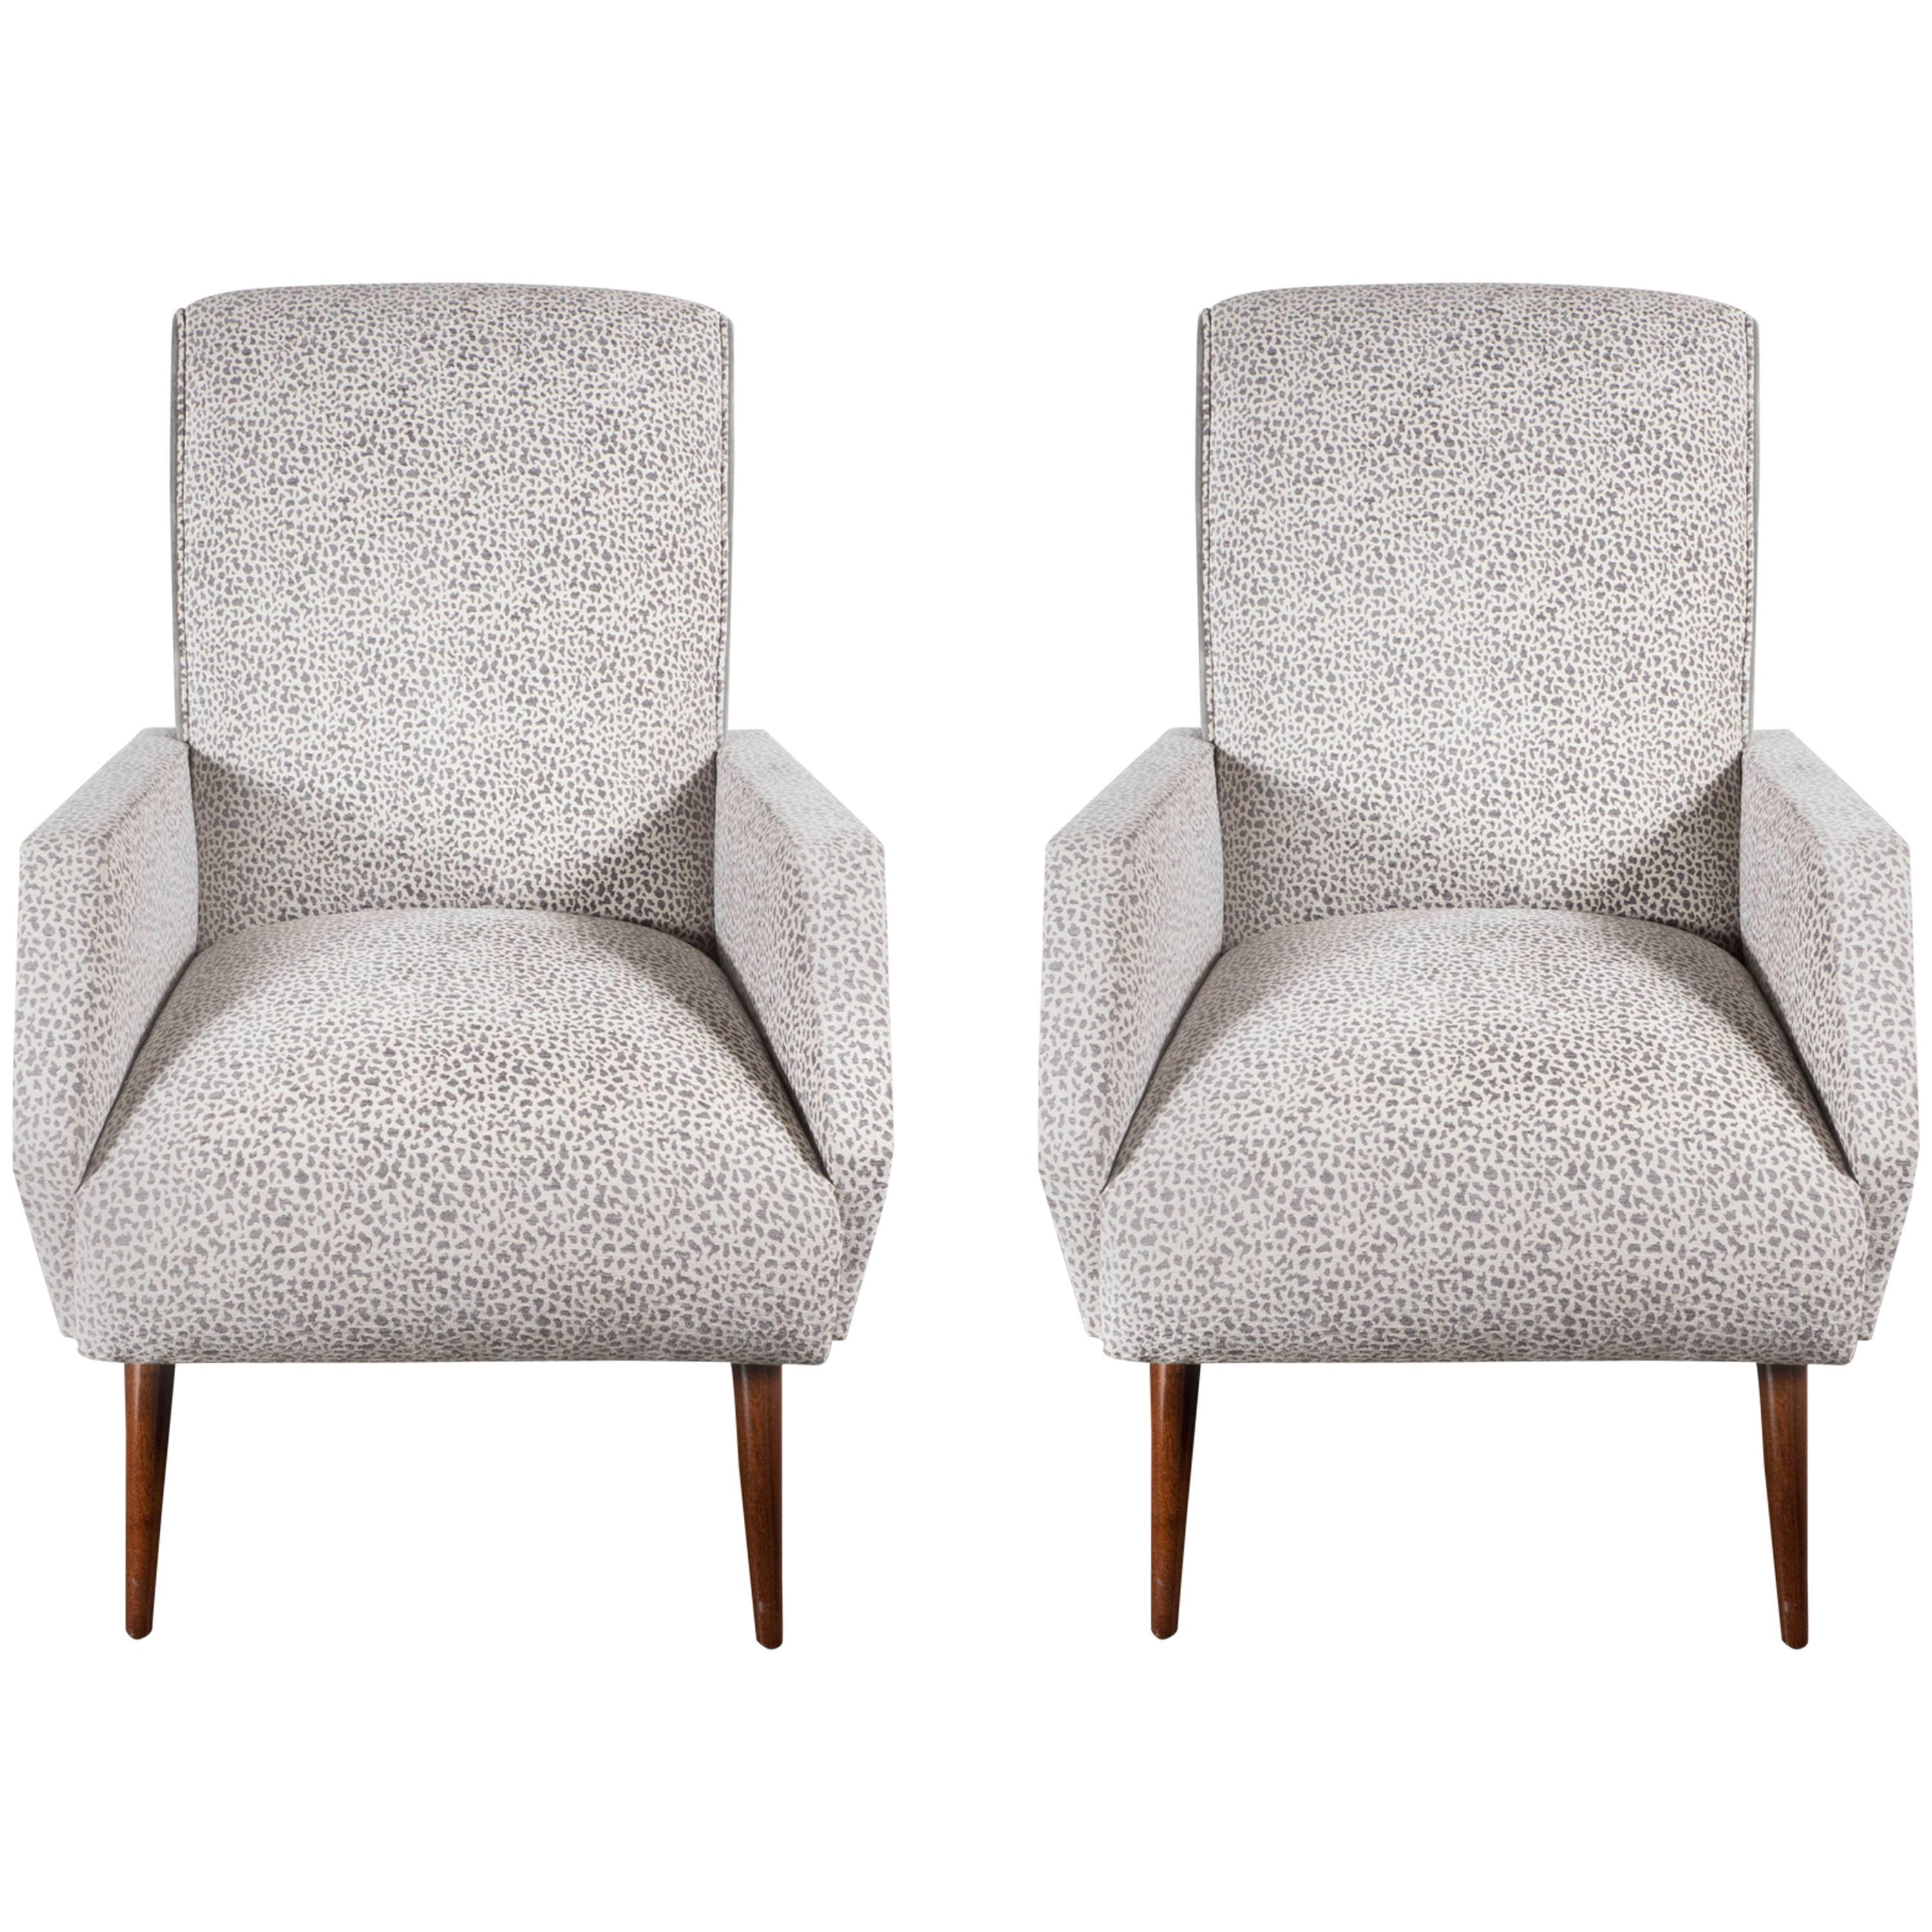 Sophisticated Pair of Mid-Century Club Chairs in the Manner of Marco Zanuso